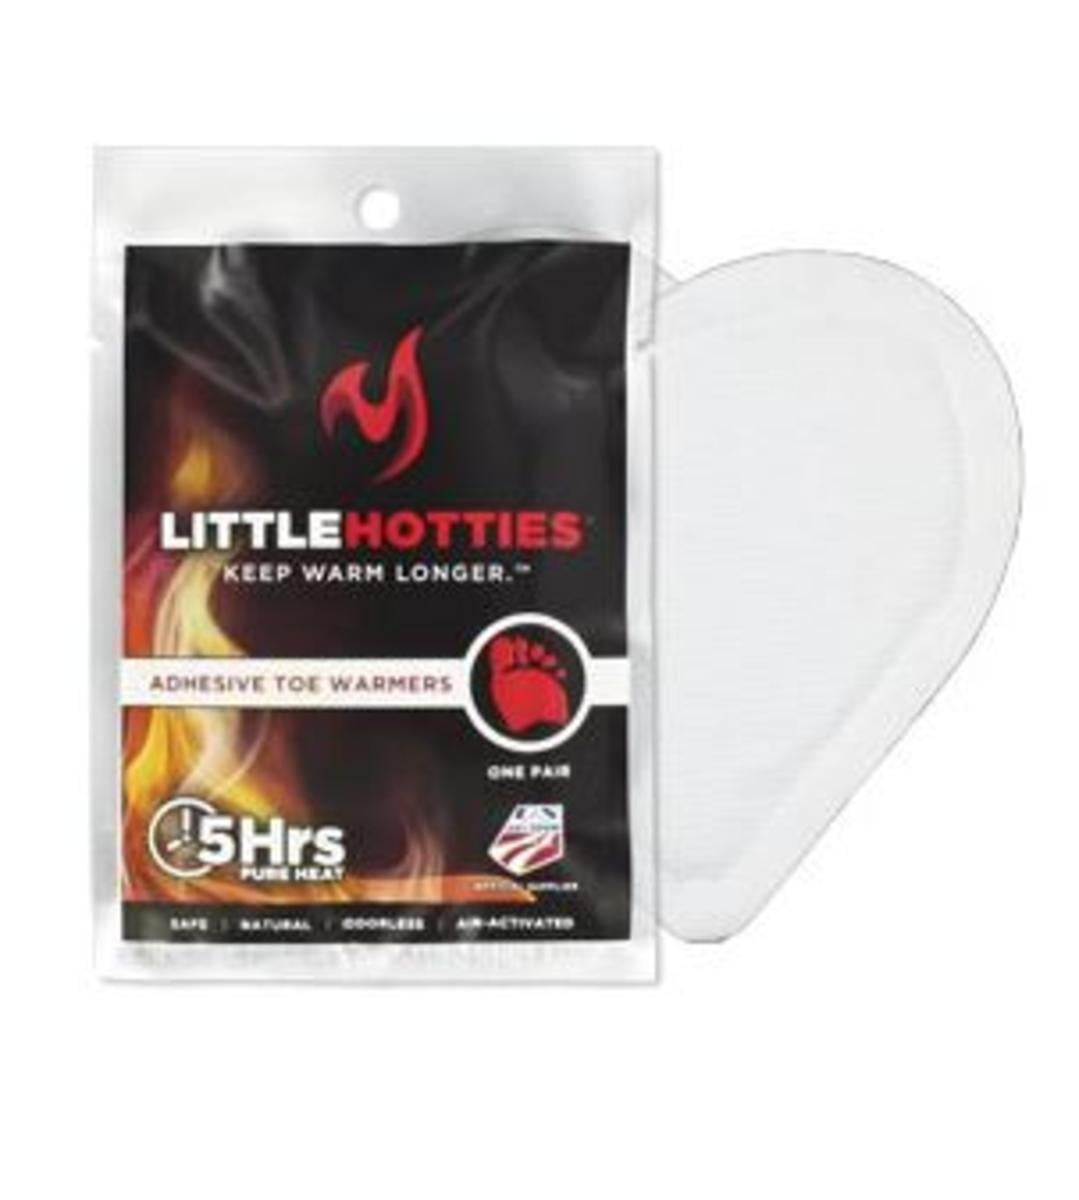 BRAND NEW in Pack! Little Hotties Adhesive Toe Warmers 5 Pair Exp. 12/31/2014 